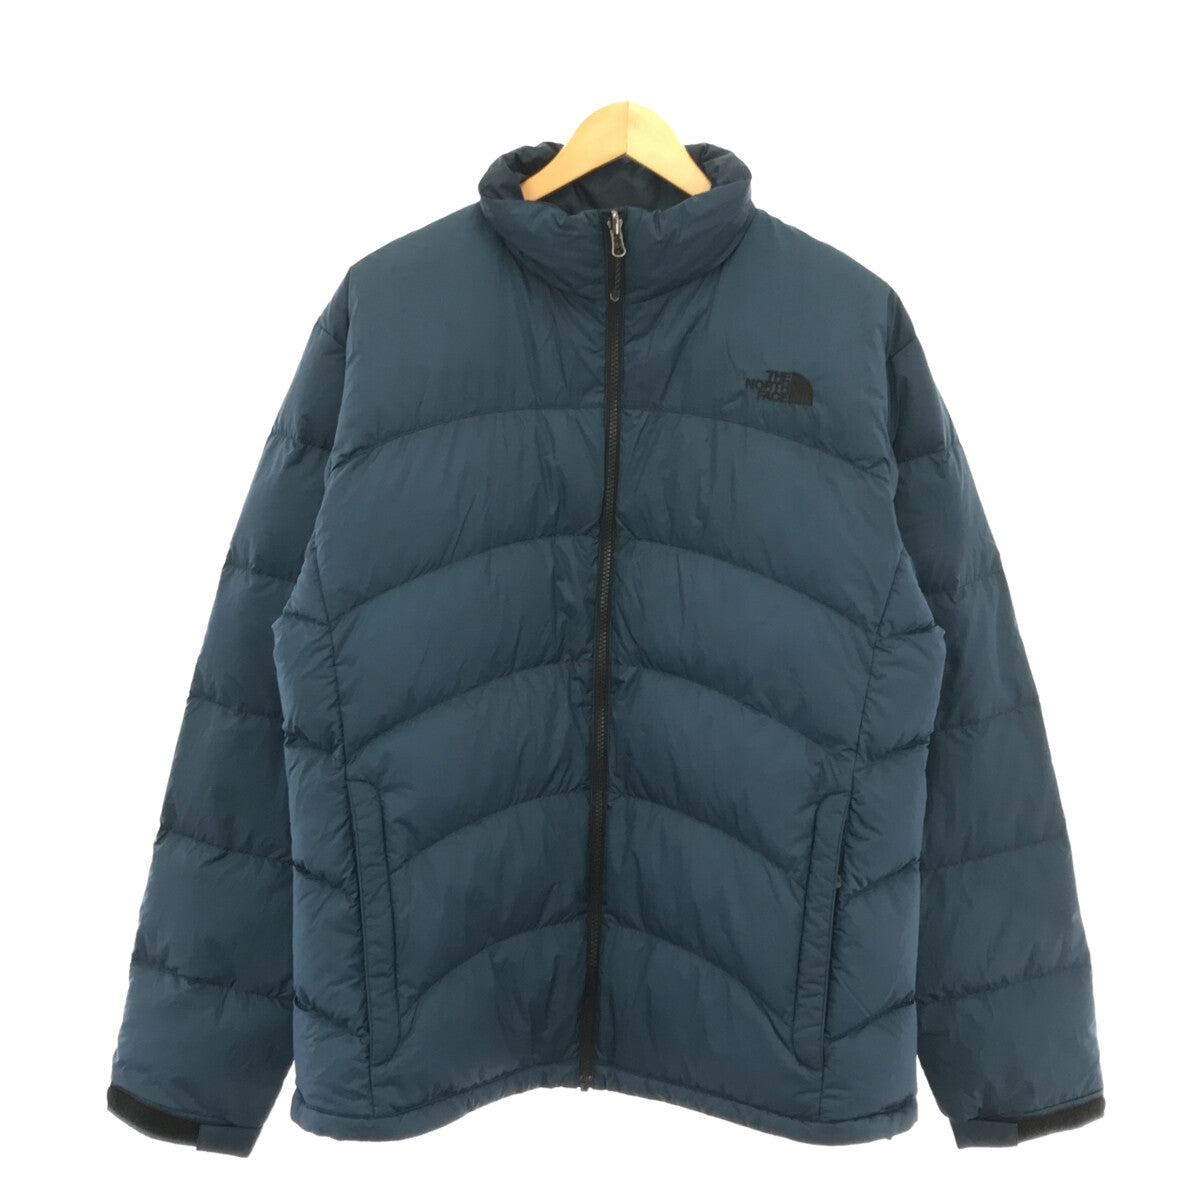 THE NORTH FACE / ザノースフェイス | Aconcagua Jacket / ND91832 ...